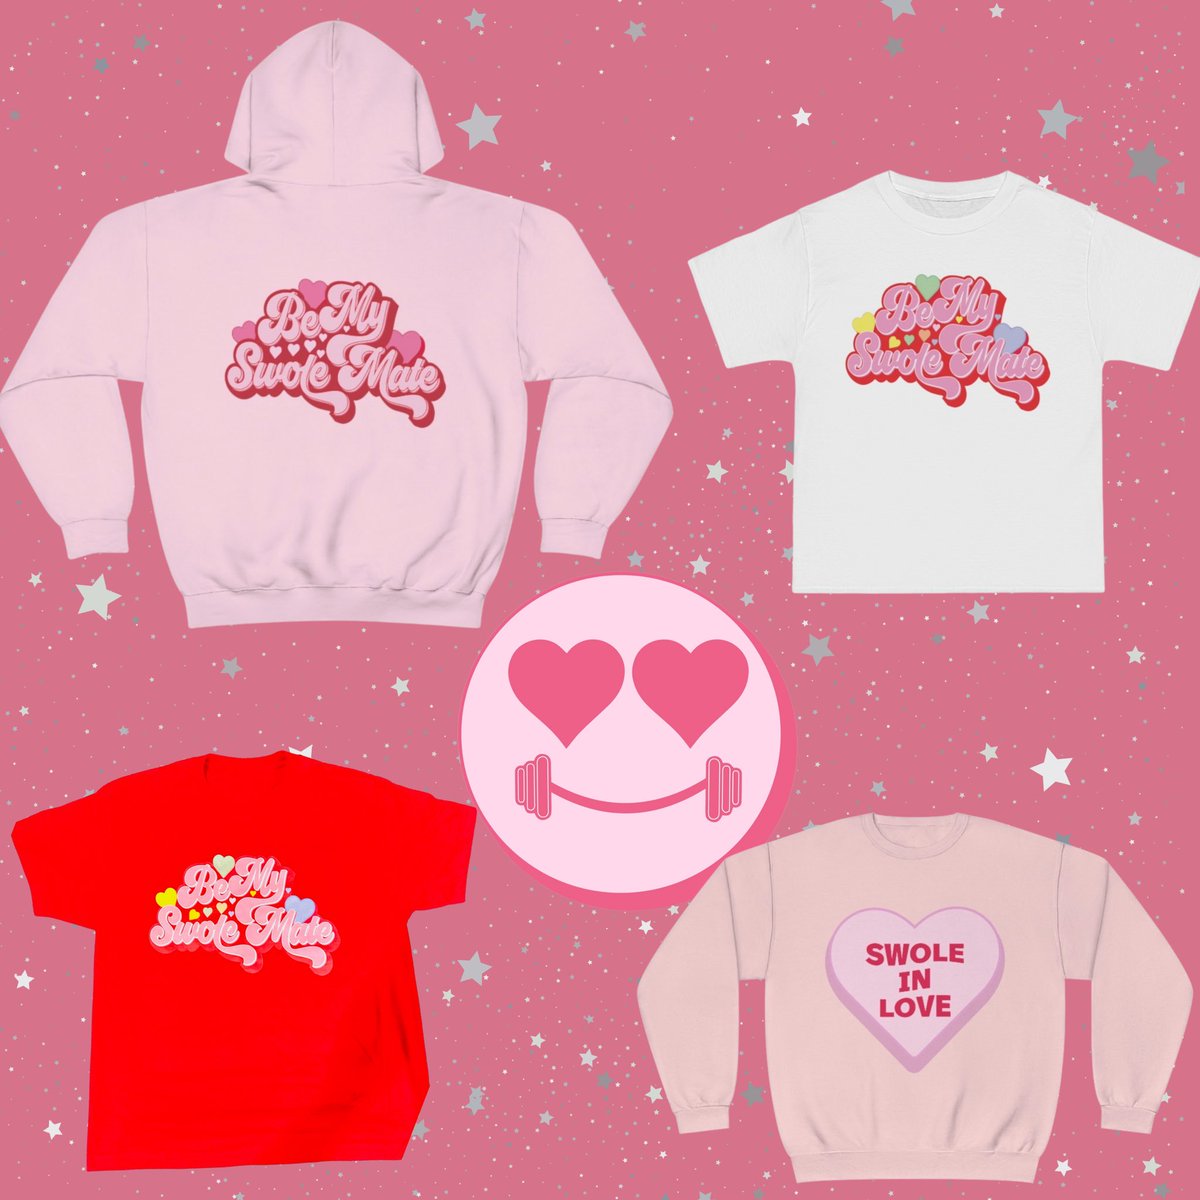 WILL YOU BE OUR SWOLEMATE 💘 VDAY DROP IS 1/17 AT 2PM EST! #musclehoodiesfam #vday #vdaydrop #valentinesday #fitspo #gyminspo #gymspo #gymgirlies #beourvalentine #cupid